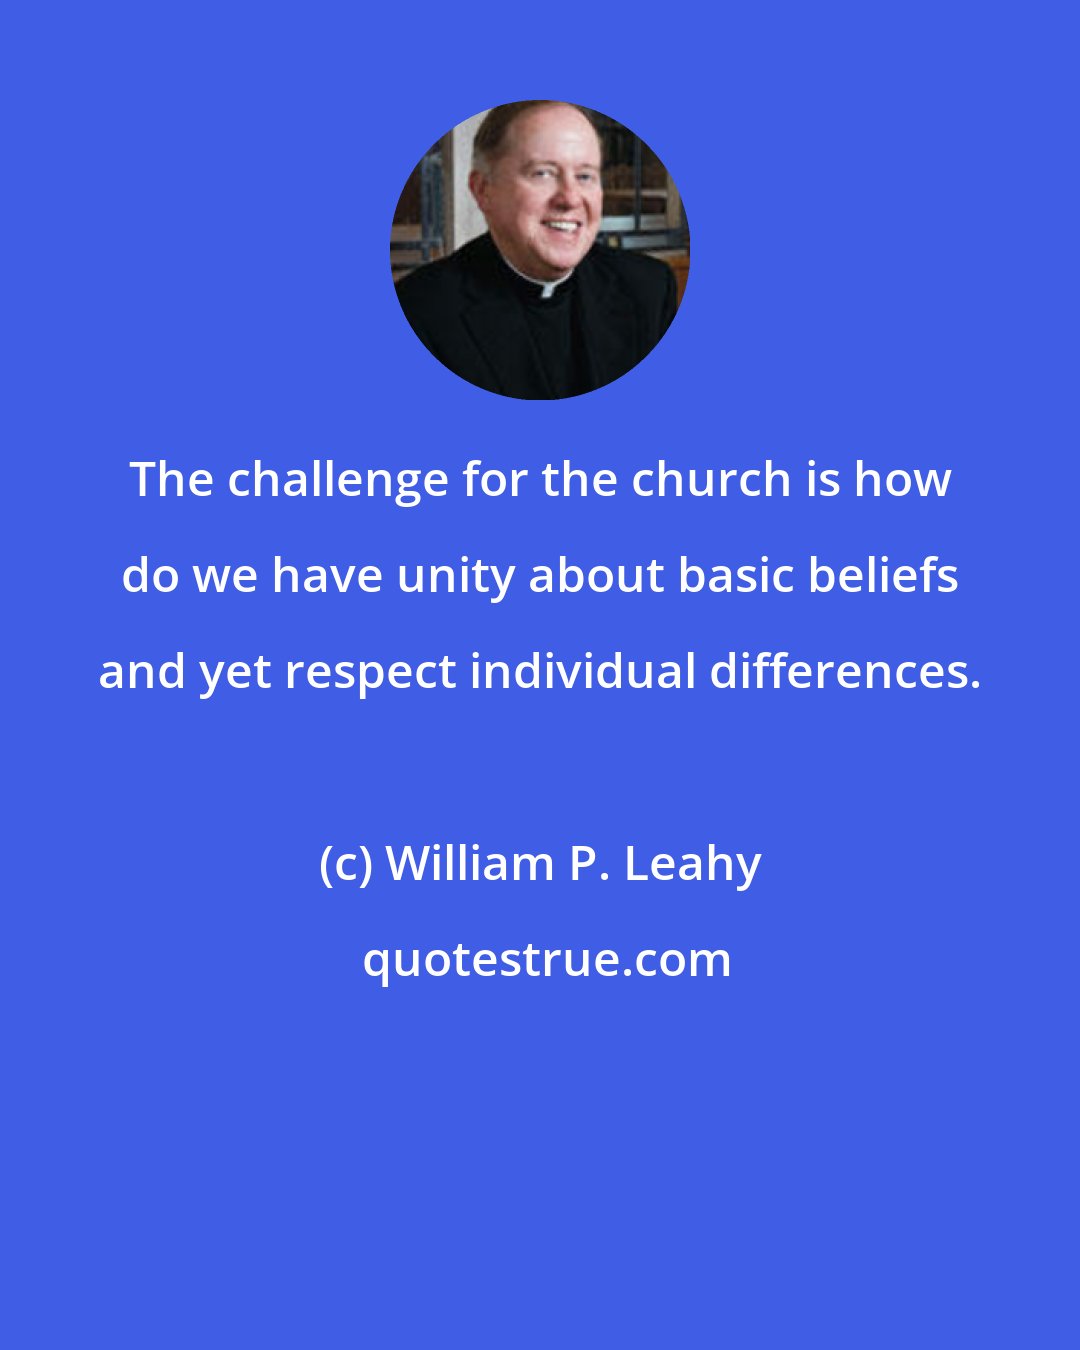 William P. Leahy: The challenge for the church is how do we have unity about basic beliefs and yet respect individual differences.